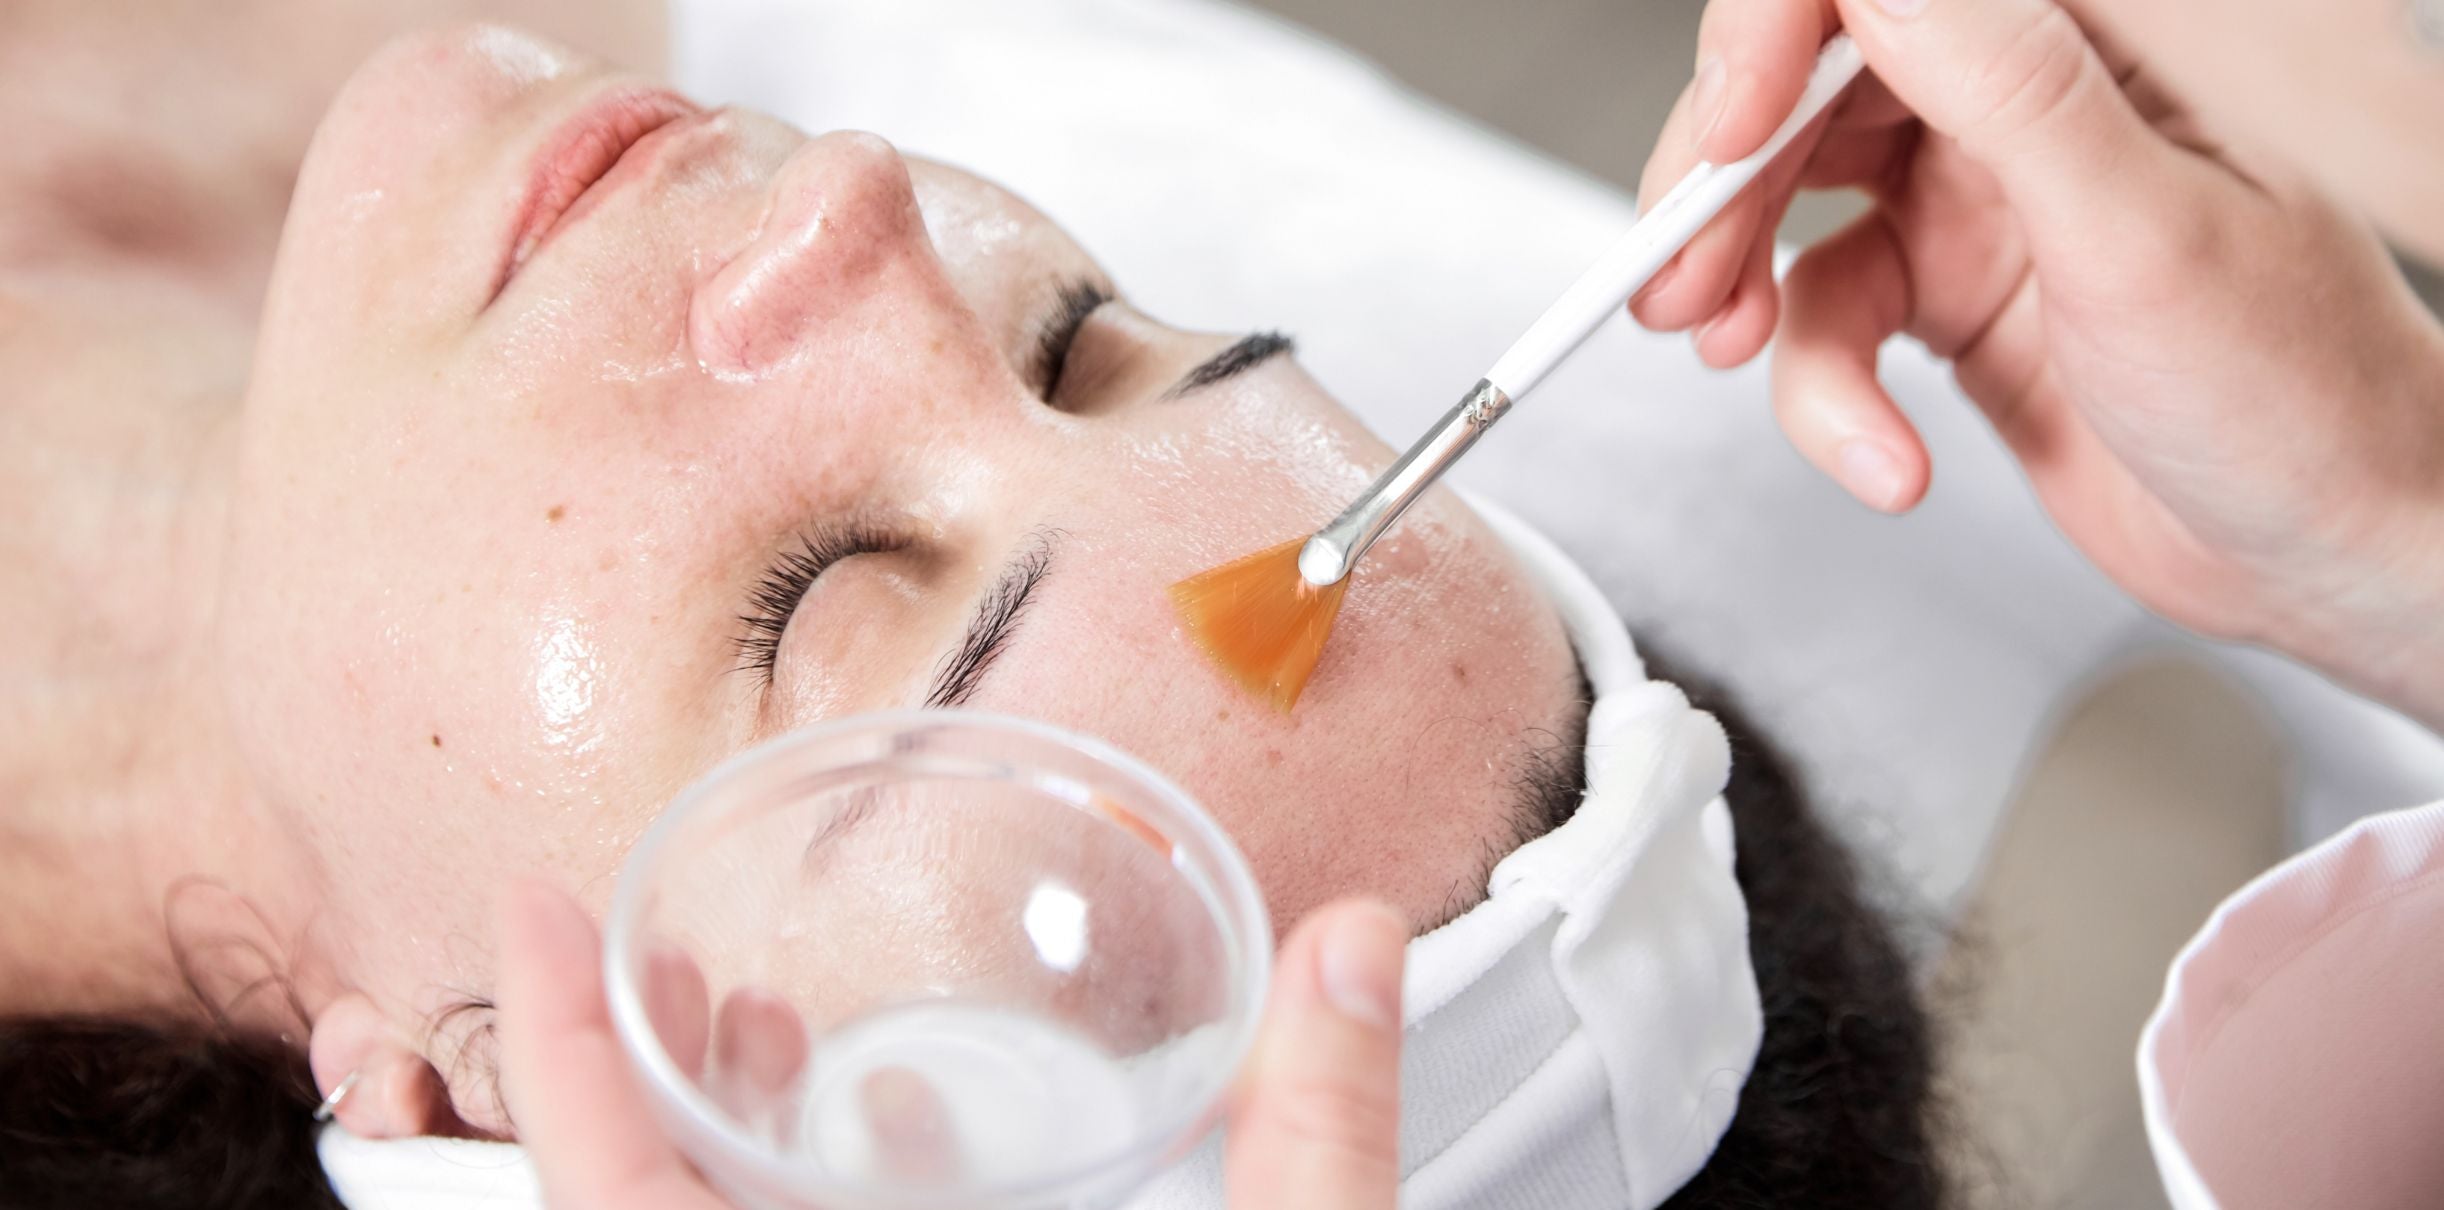 Woman getting a chemical peel treatment